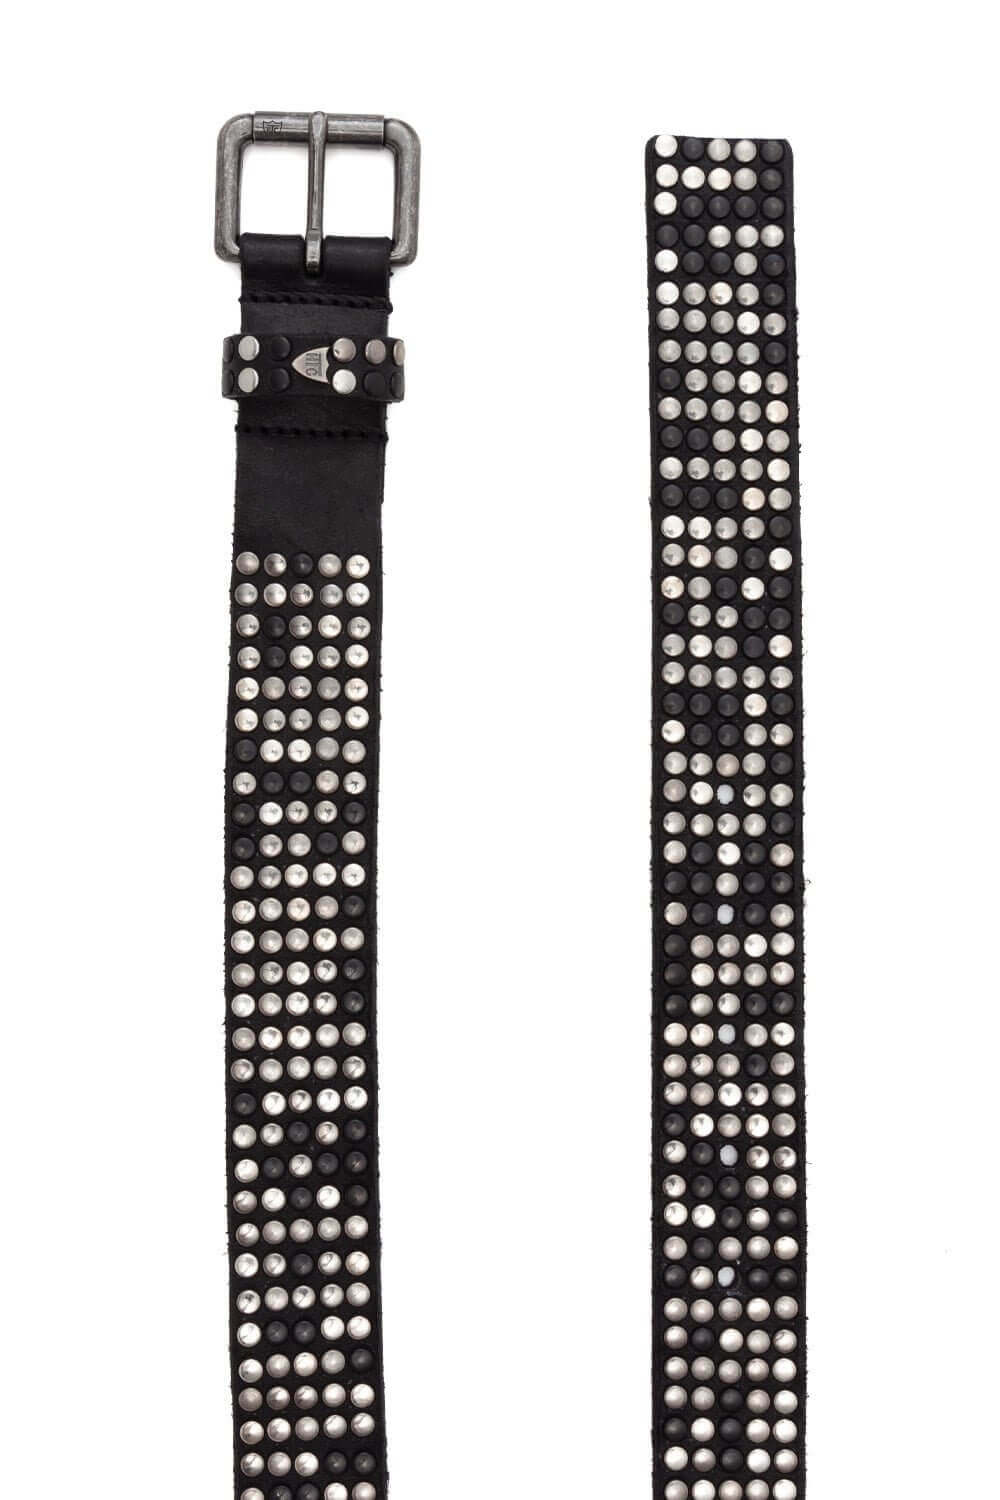 5.000 studs belt Black leather belt with mixed studs, brass buckle, studded zamac belt loop with HTC logo rivet. Height: 3.5 cm. Made in Italy. HTC LOS ANGELES